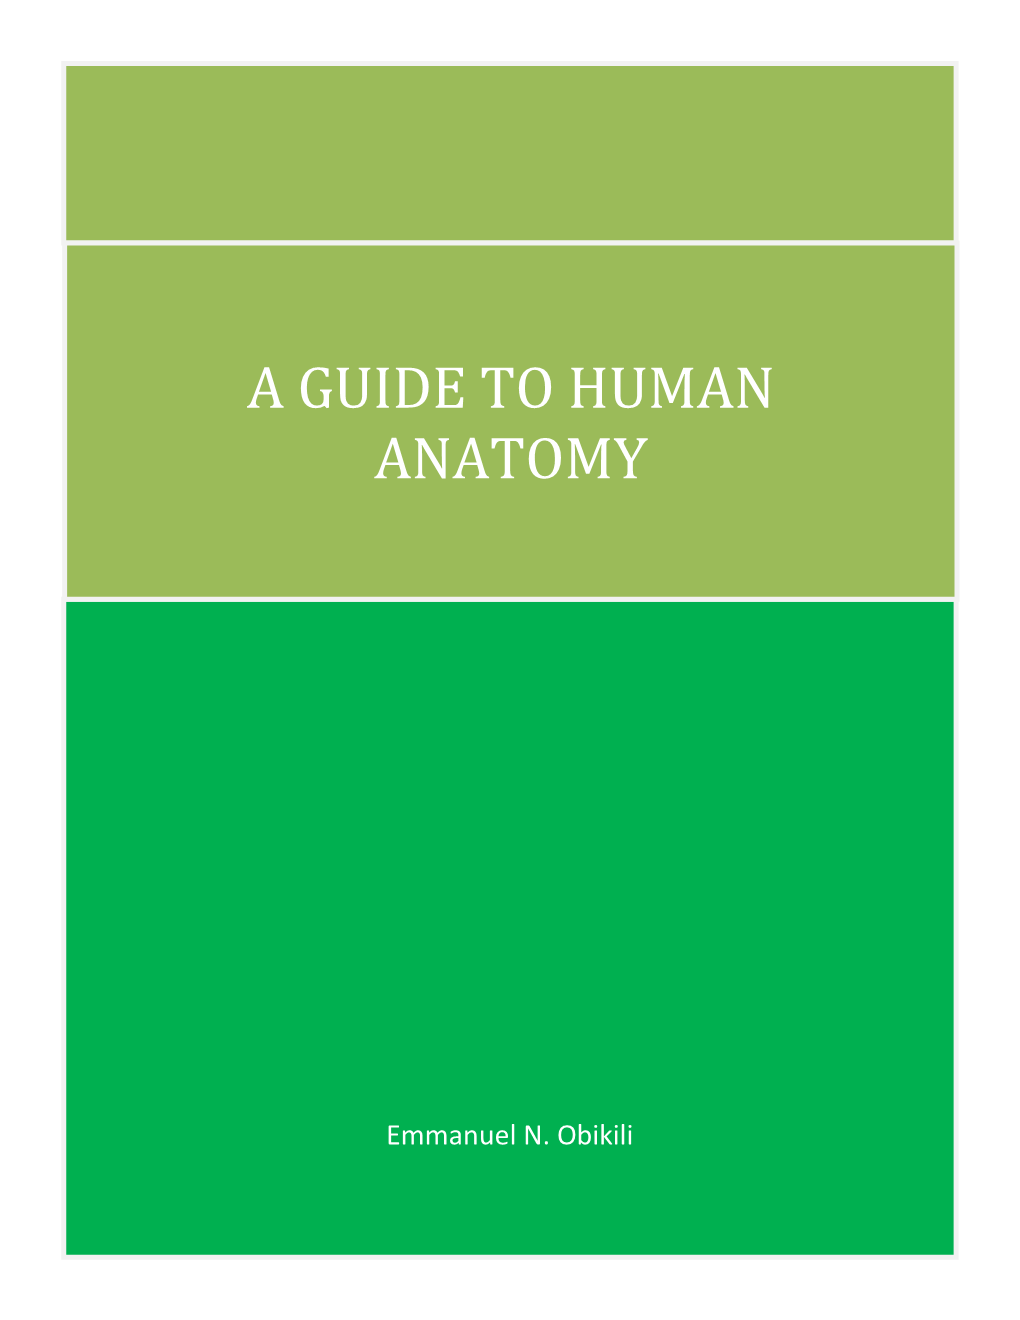 A Guide to Human Anatomy